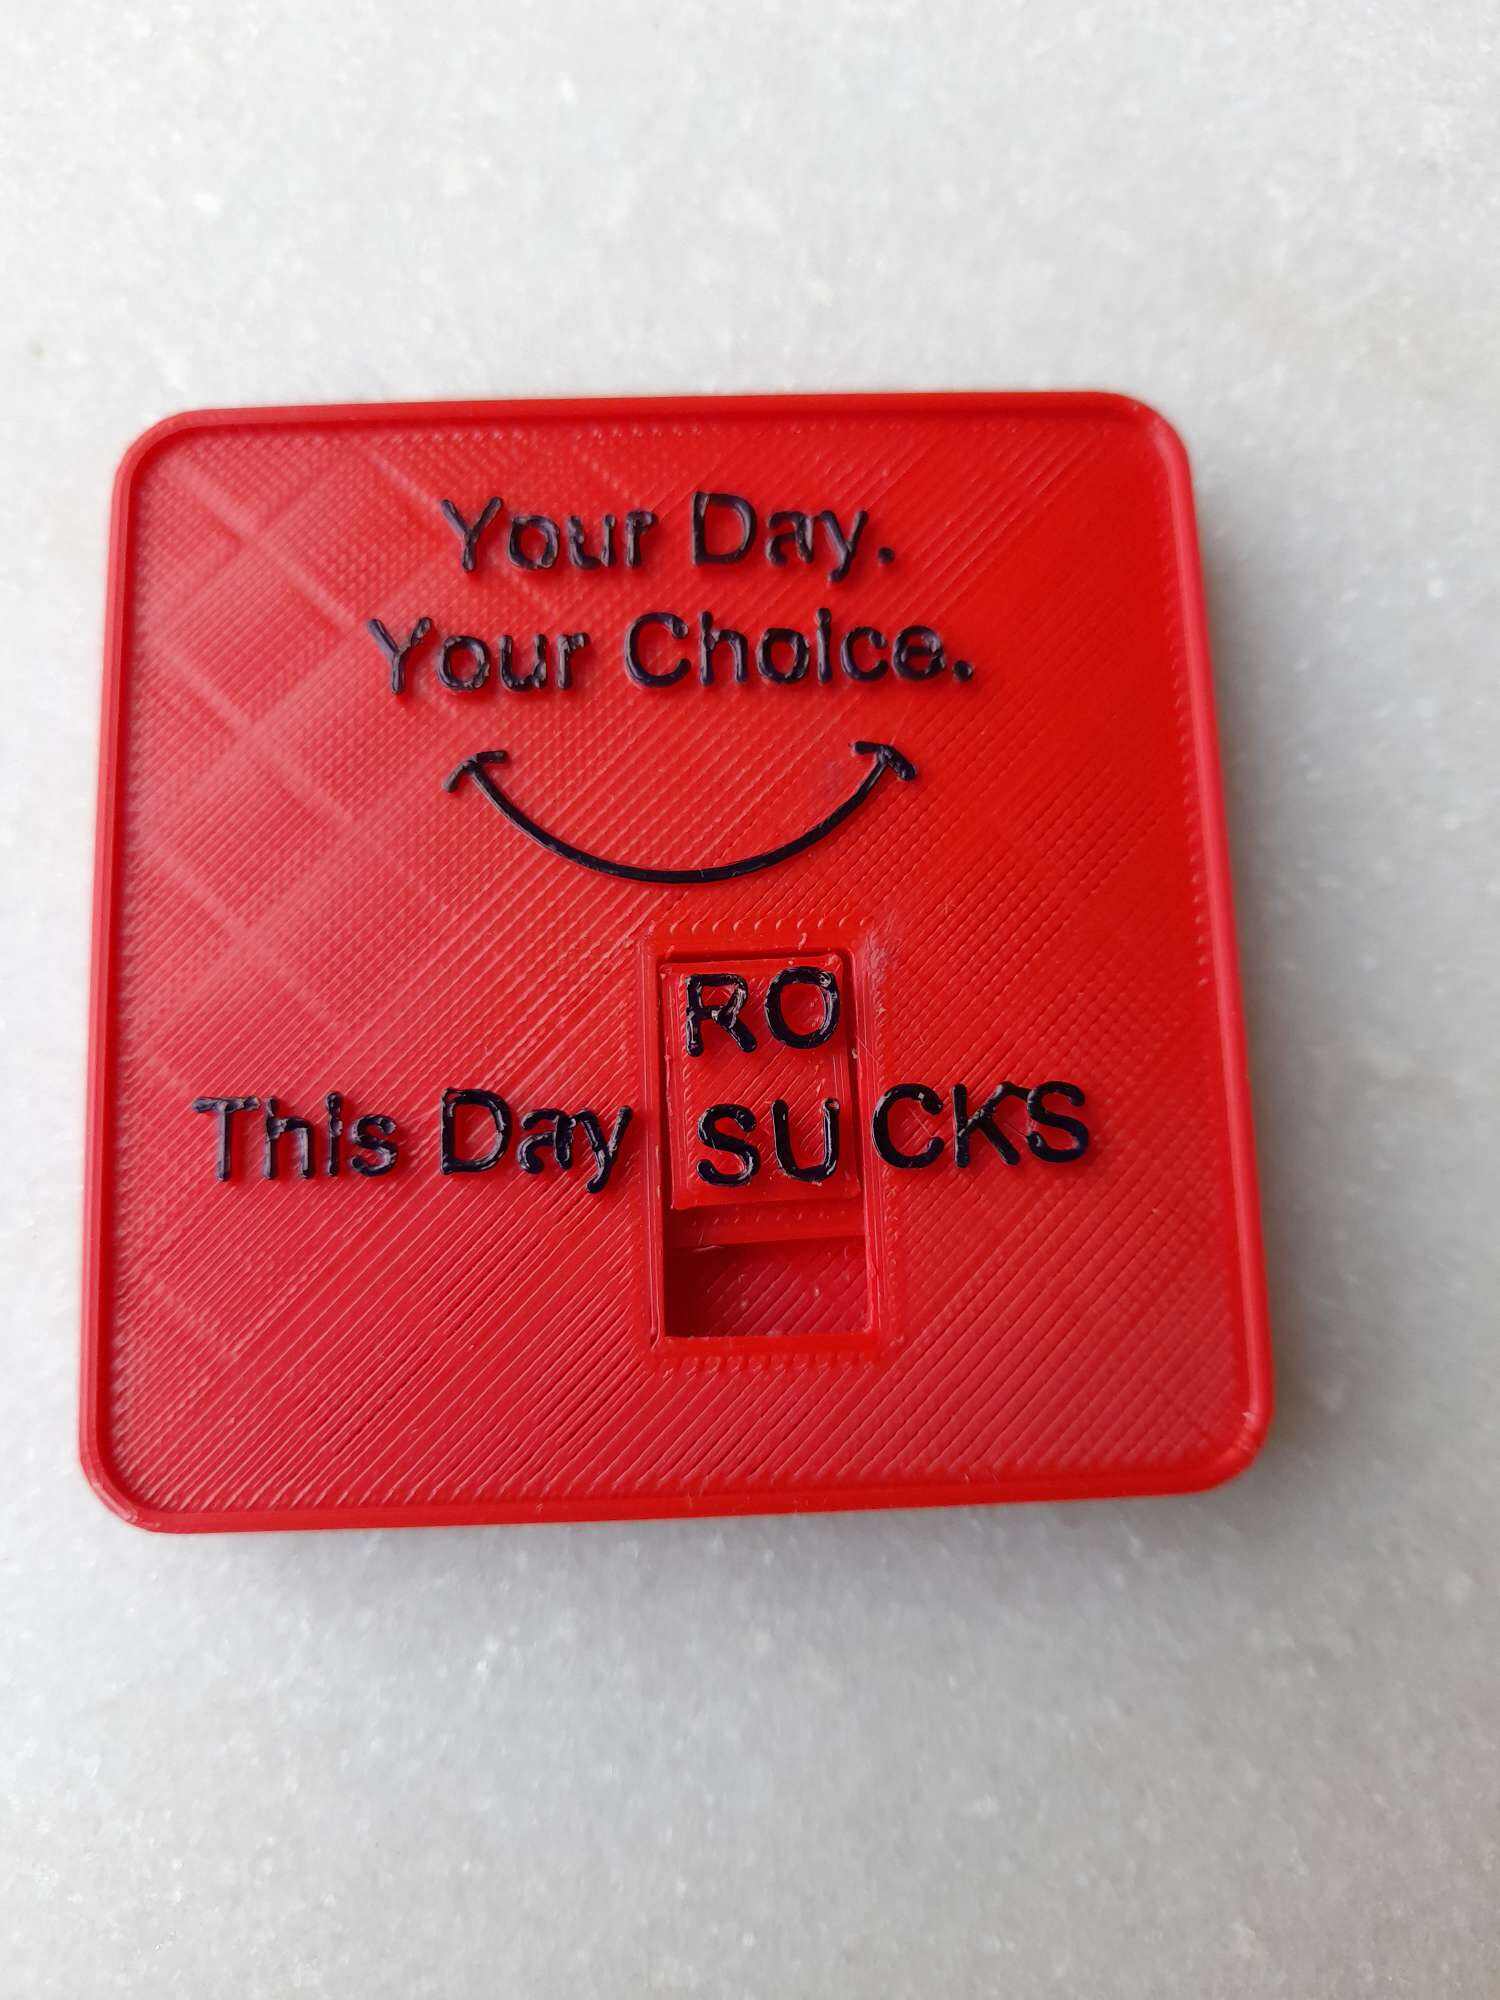 Your Day, Your Choice. Rocks or Sucks. the choice is yours.